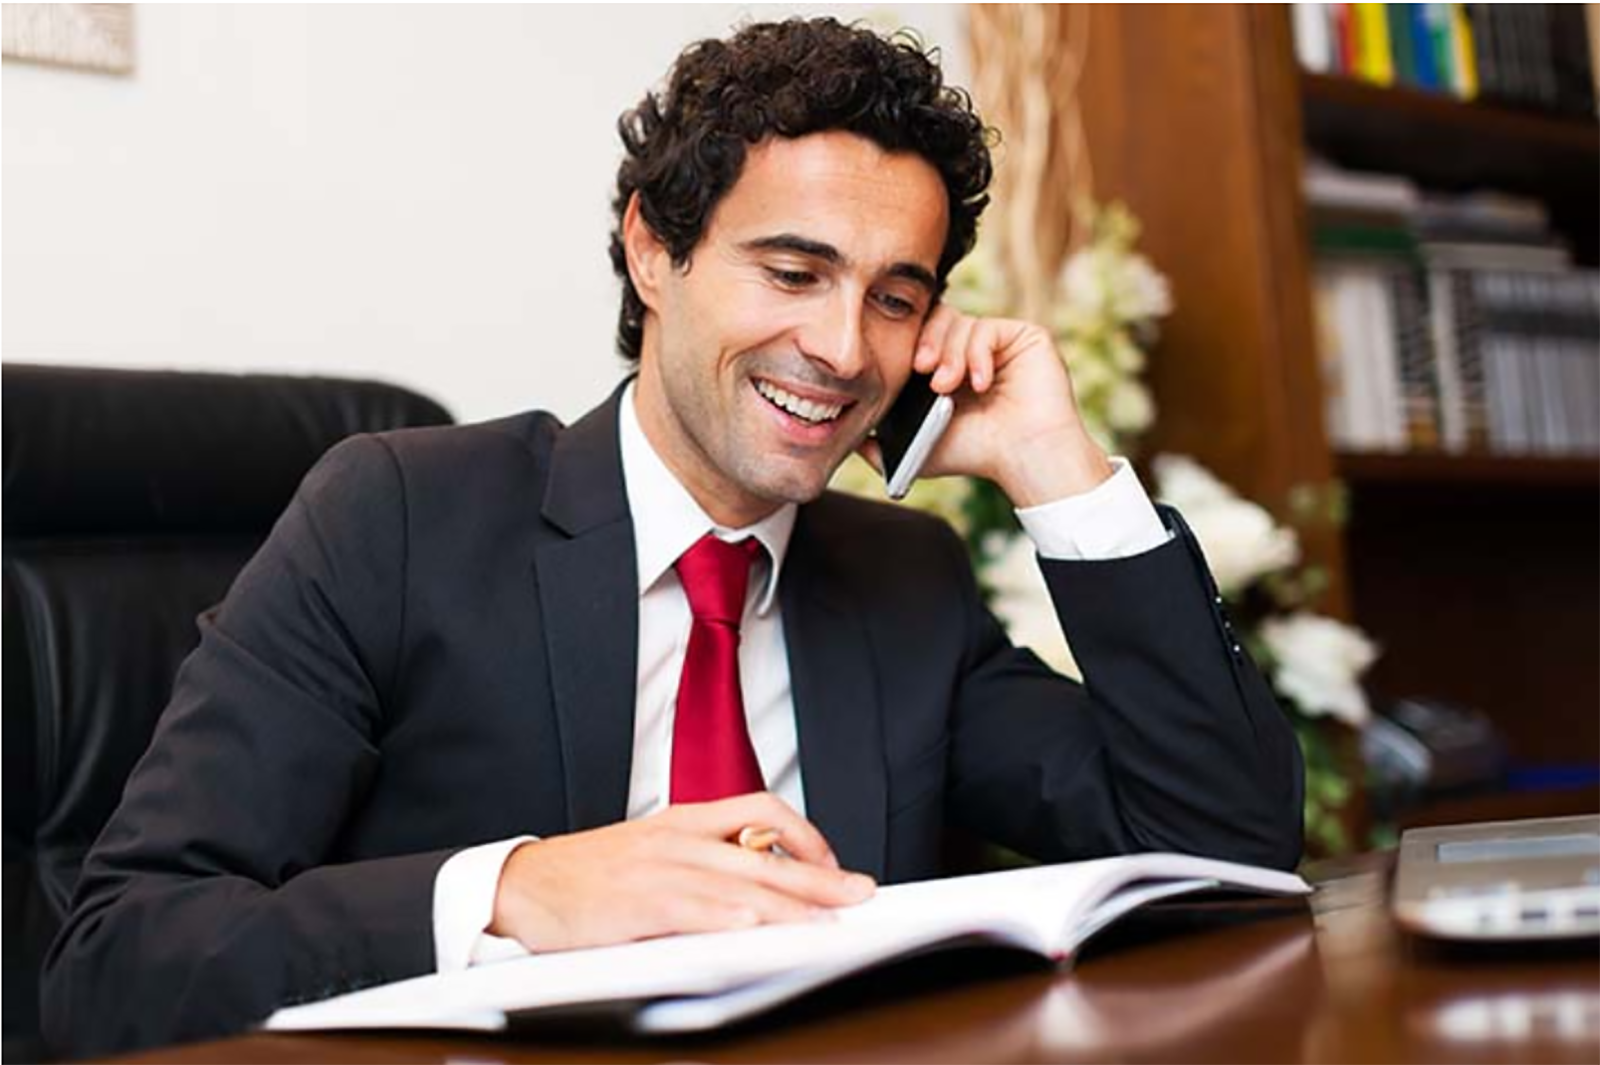 smiling man talking on phone in office